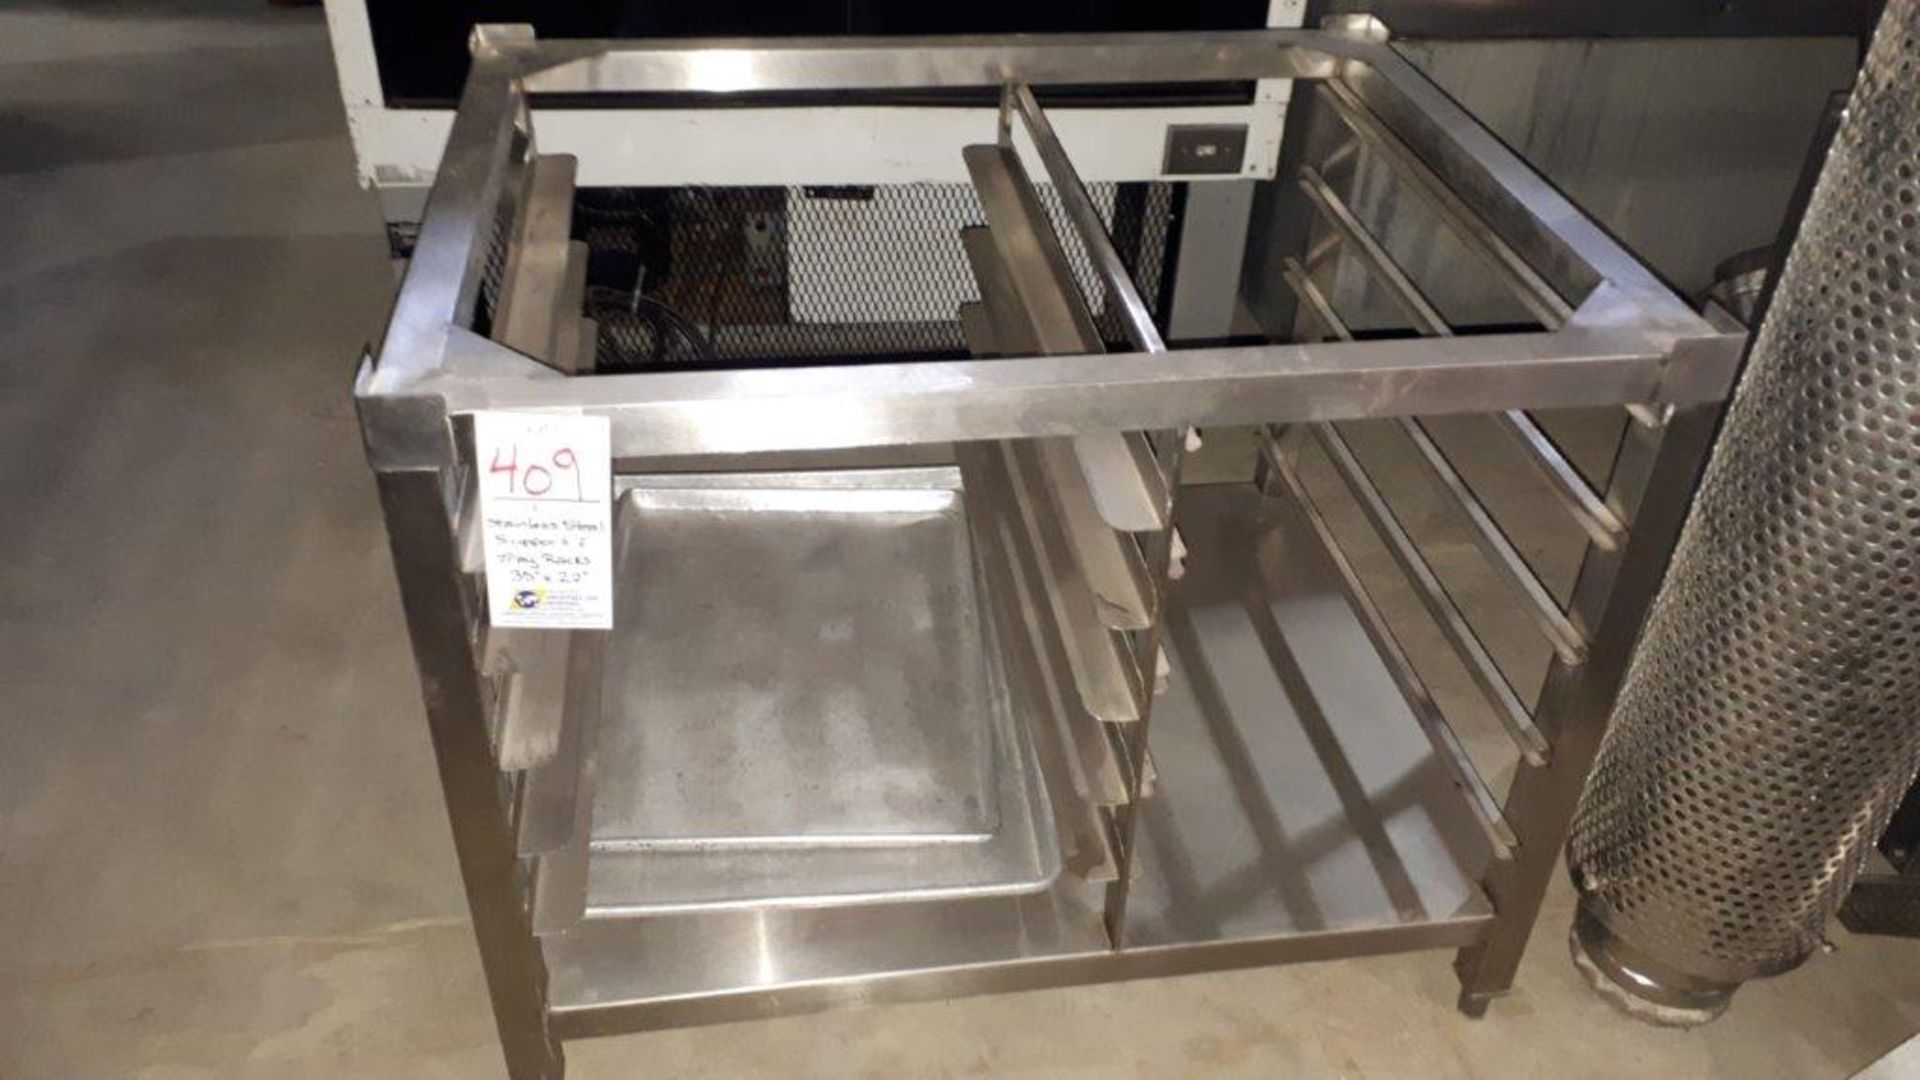 Stainless steel support & tray racks, 35"x27"